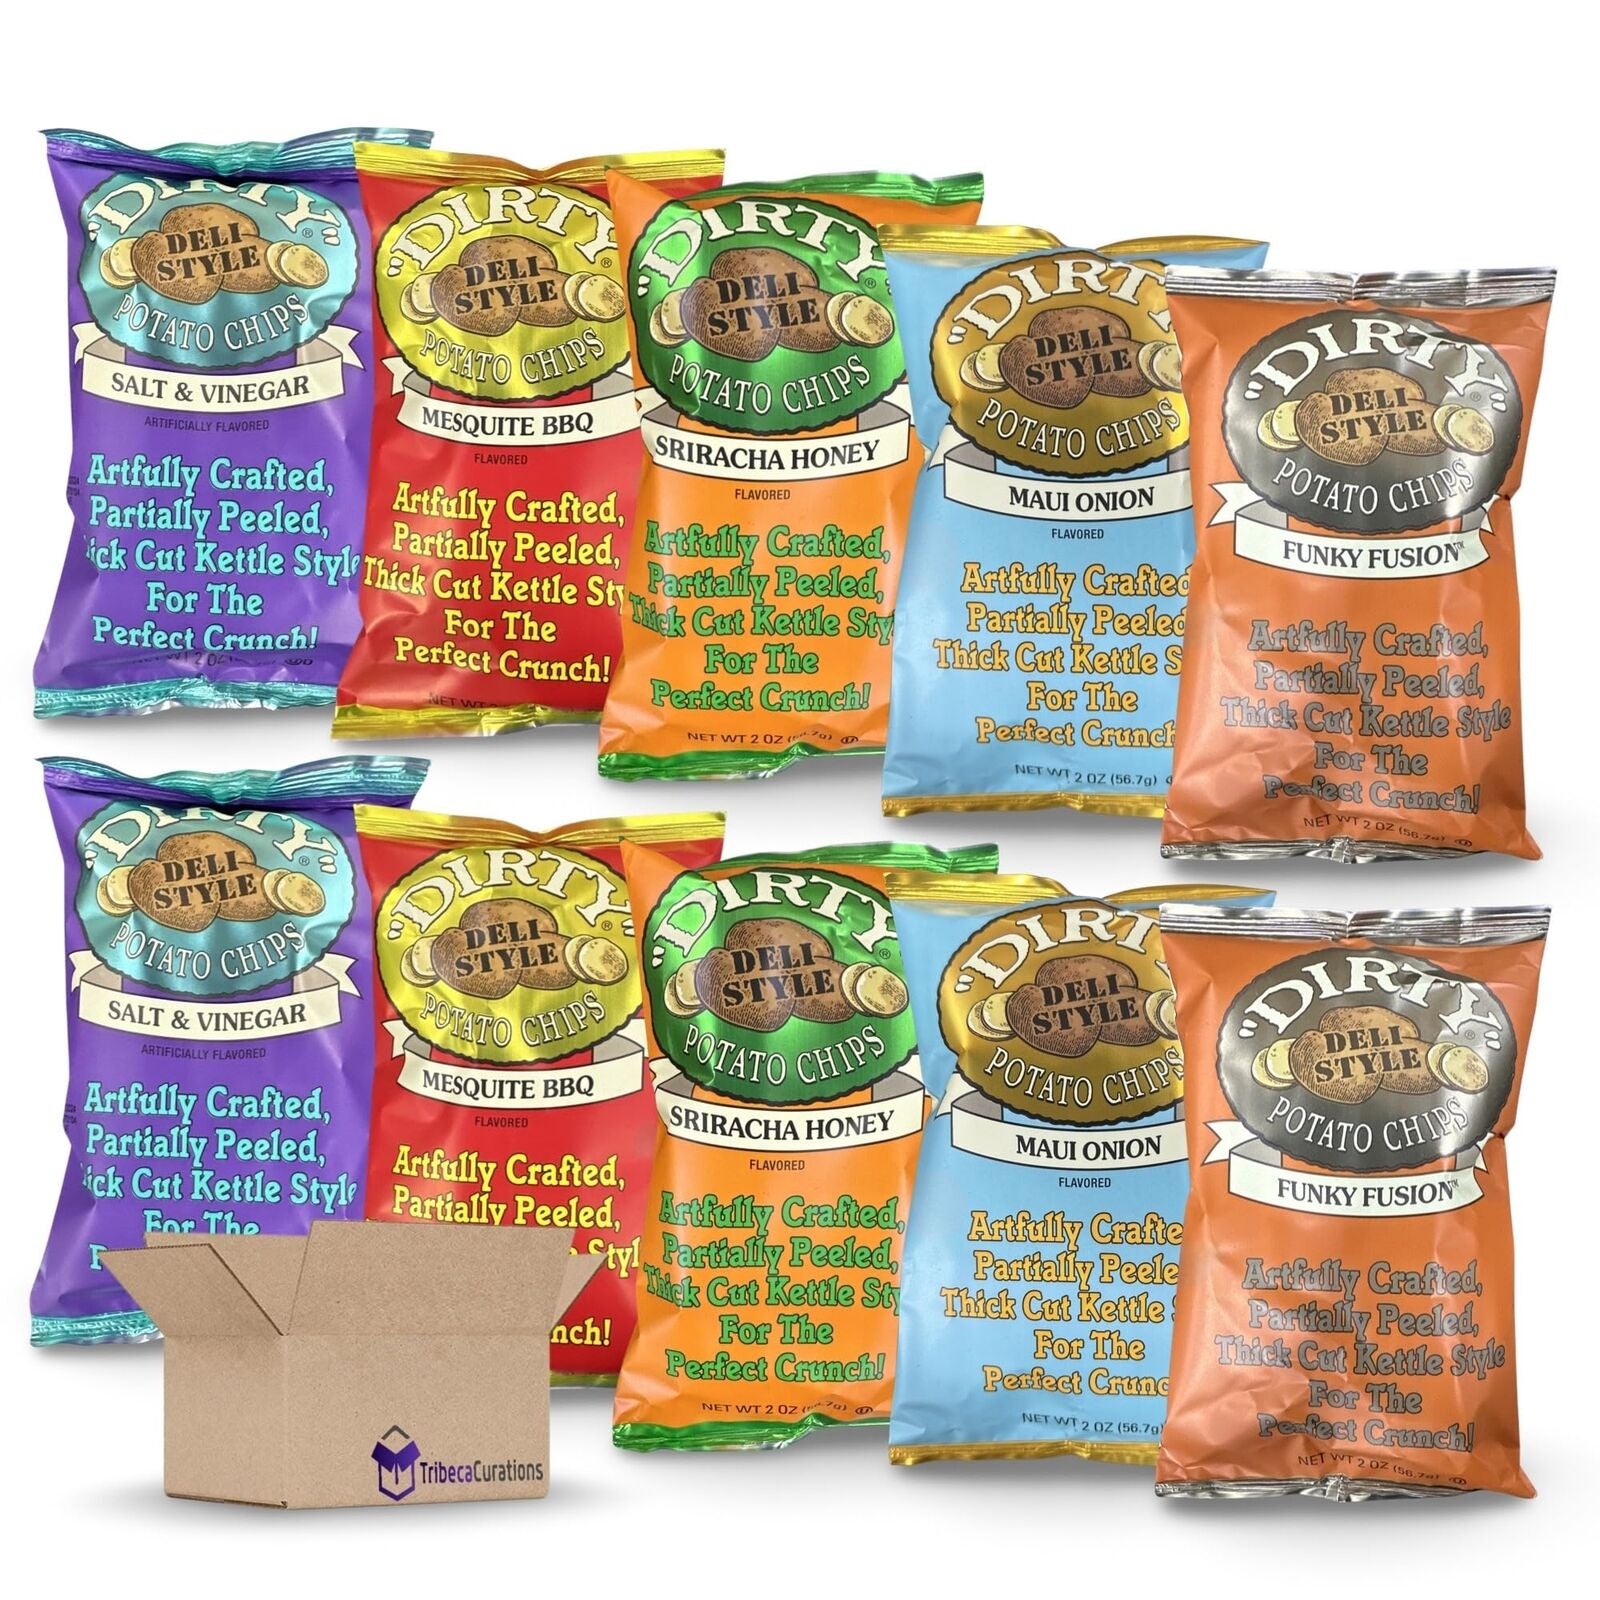 Deli Style Potato Chips Variety Pack | Funky Fusion, Maui Onion, Mesquite